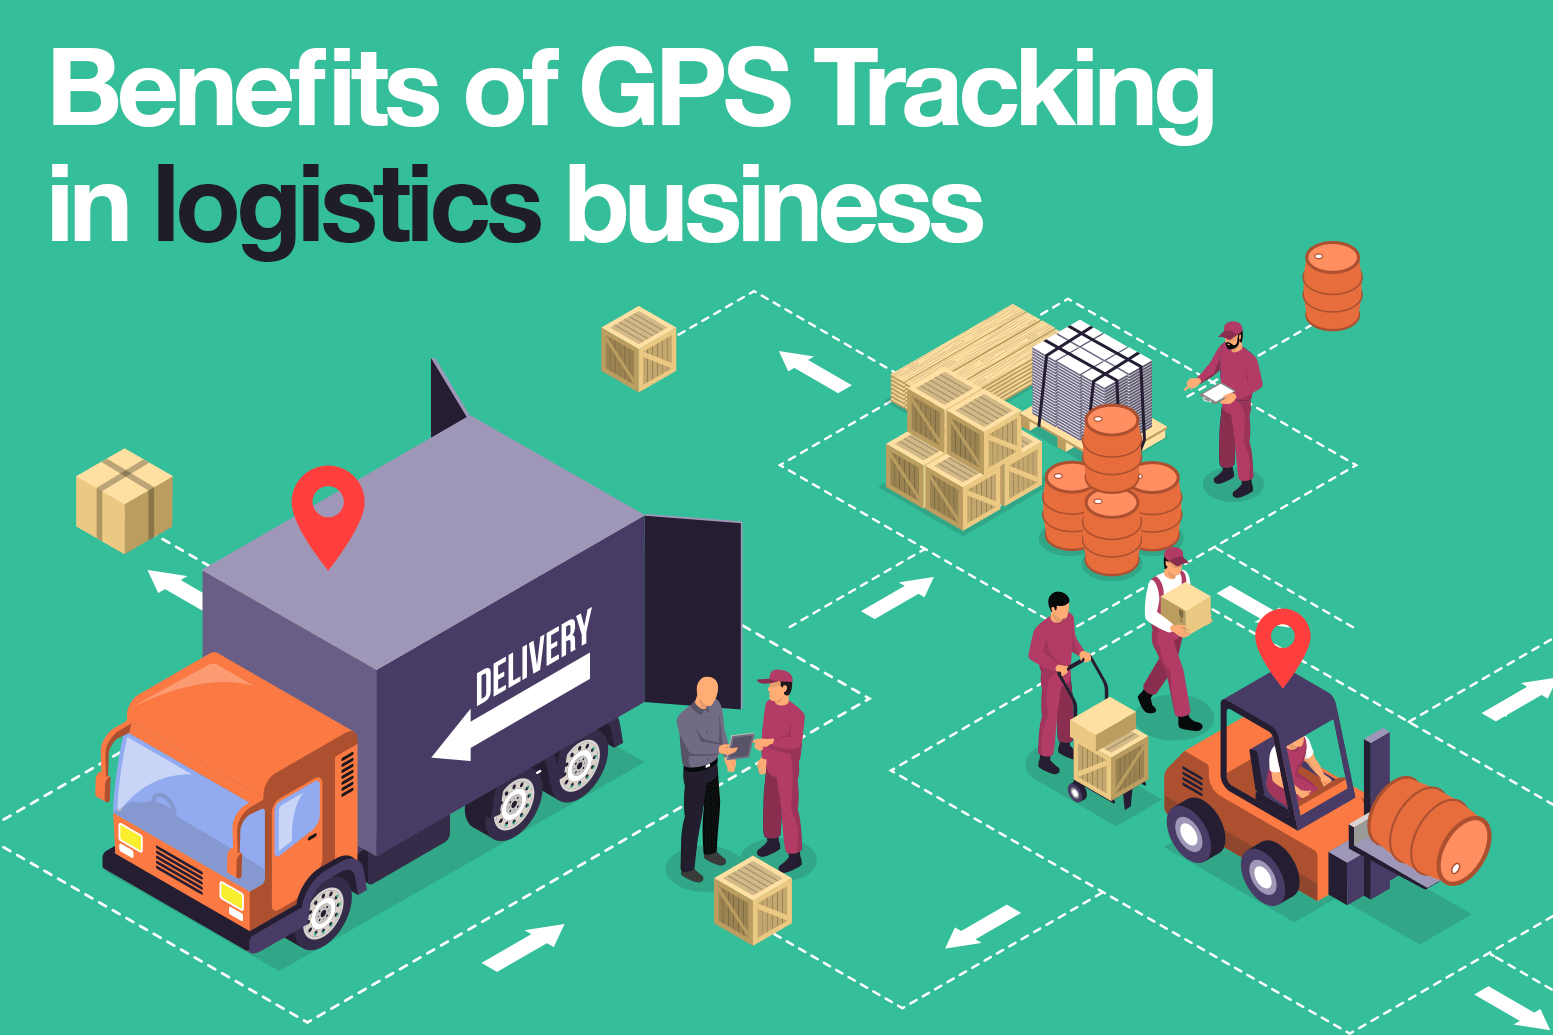 GPS tracker for truck featured image by Onelap